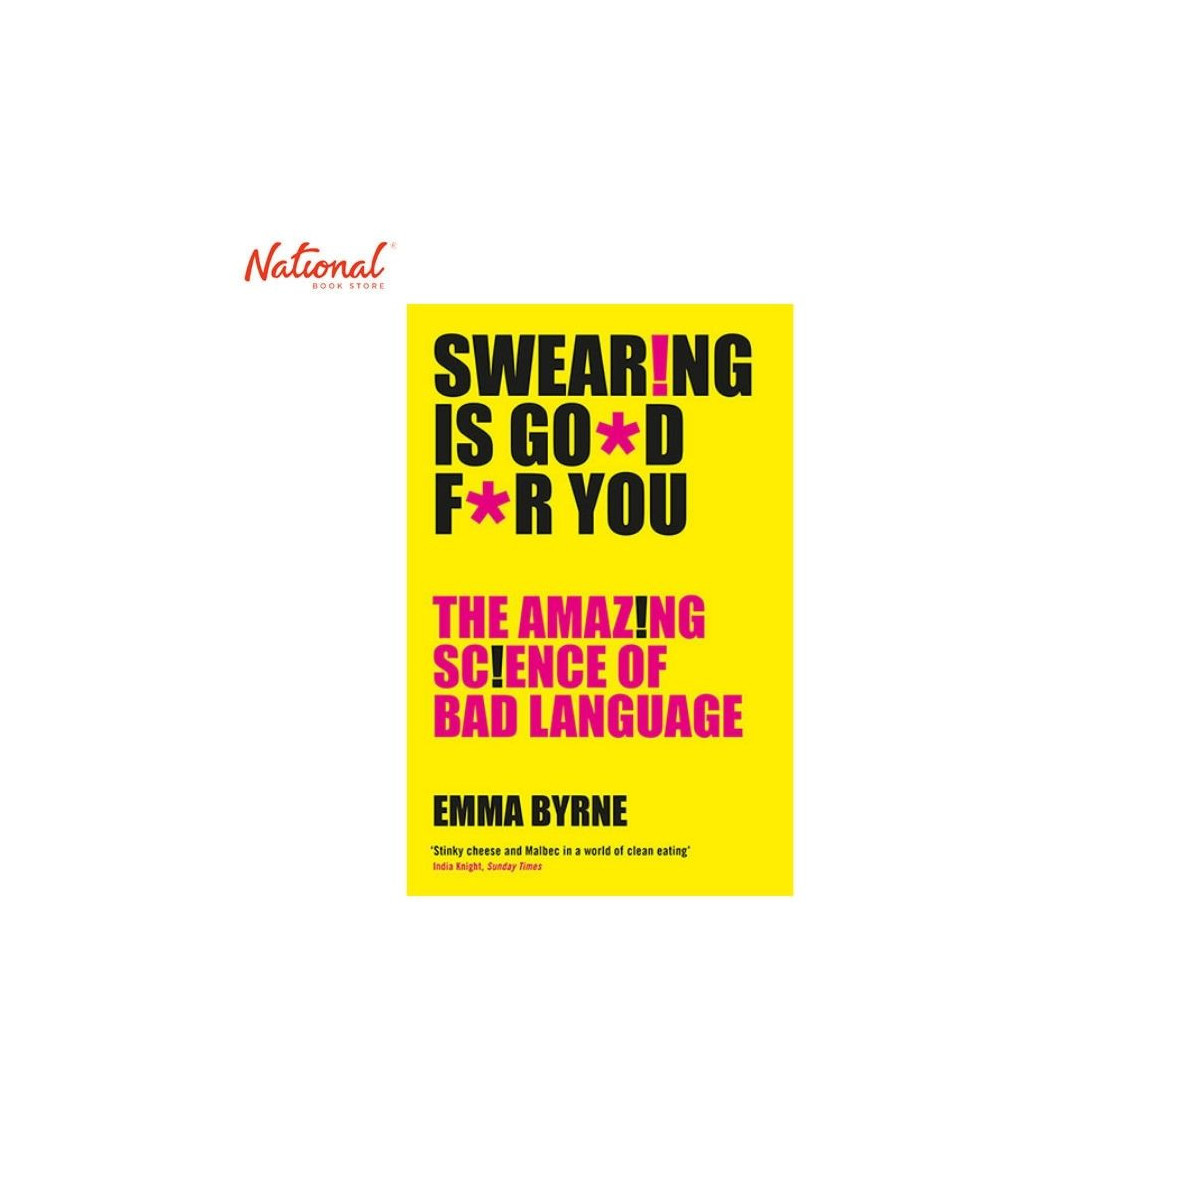 Swearing is Good for You Trade Paperback by Emma Byrne